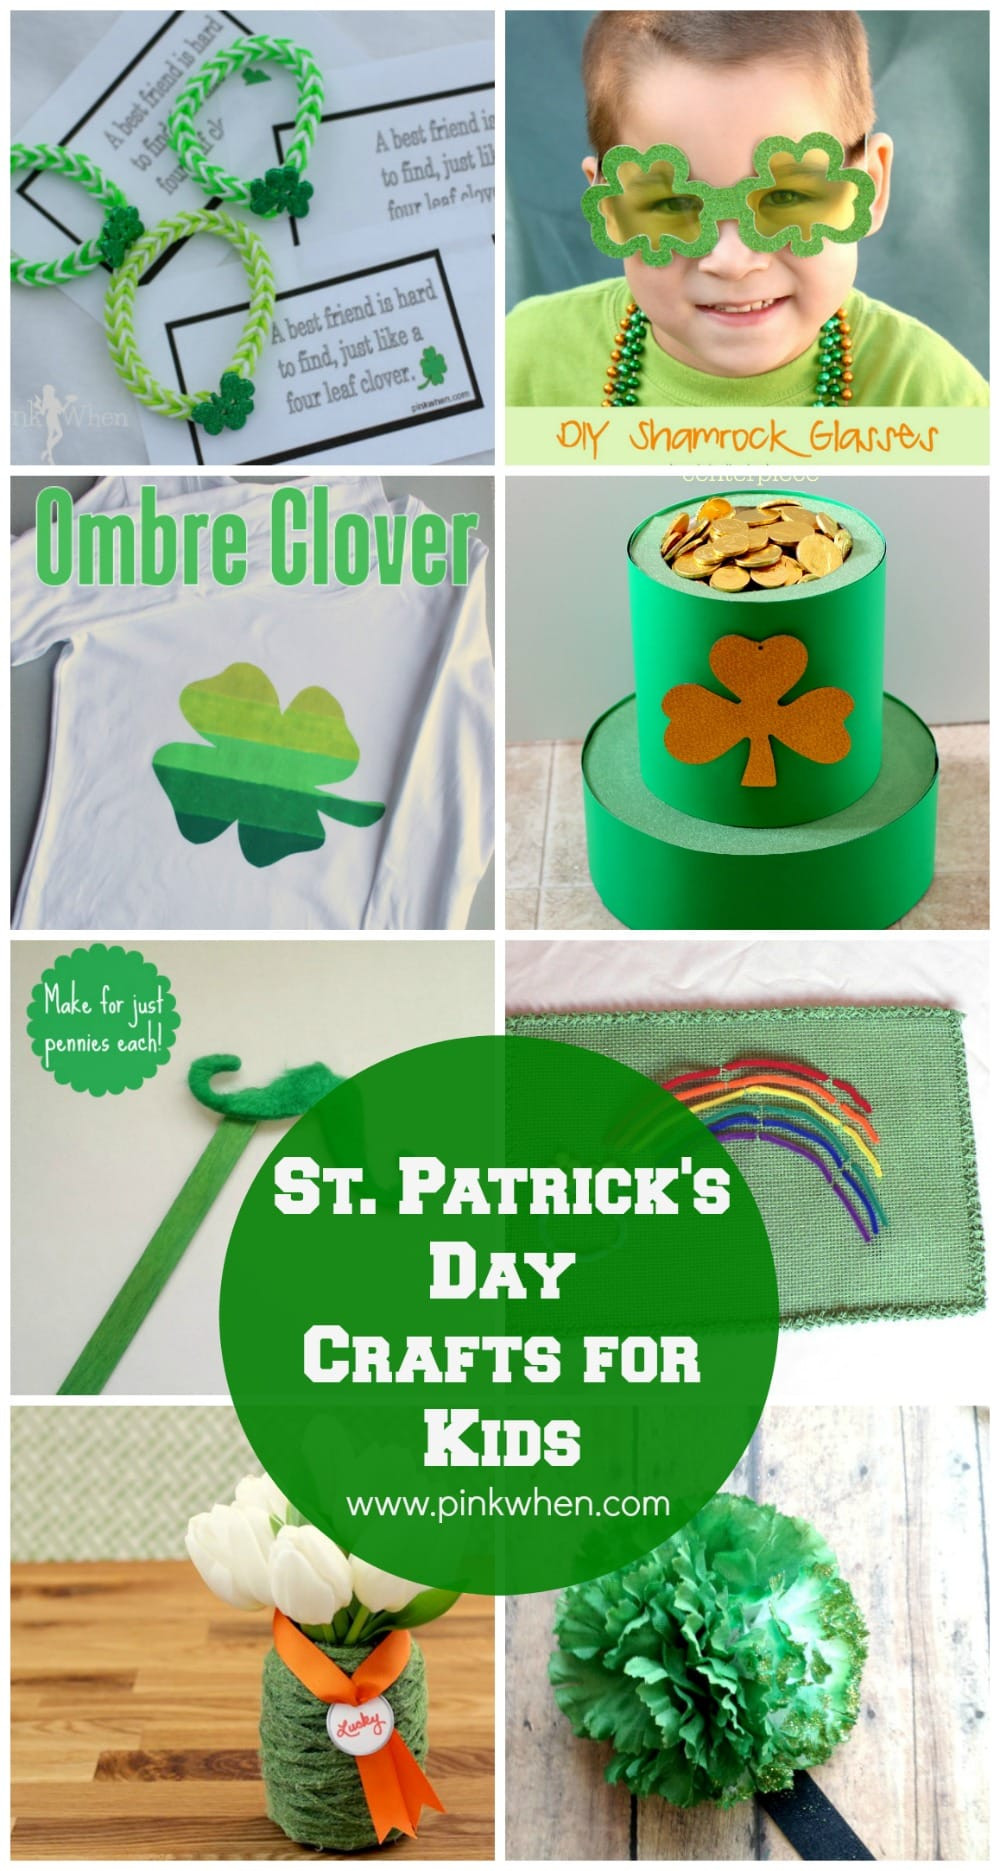 St Patrick's Day Crafts Pinterest
 10 St Patrick s Day Crafts for Kids PinkWhen